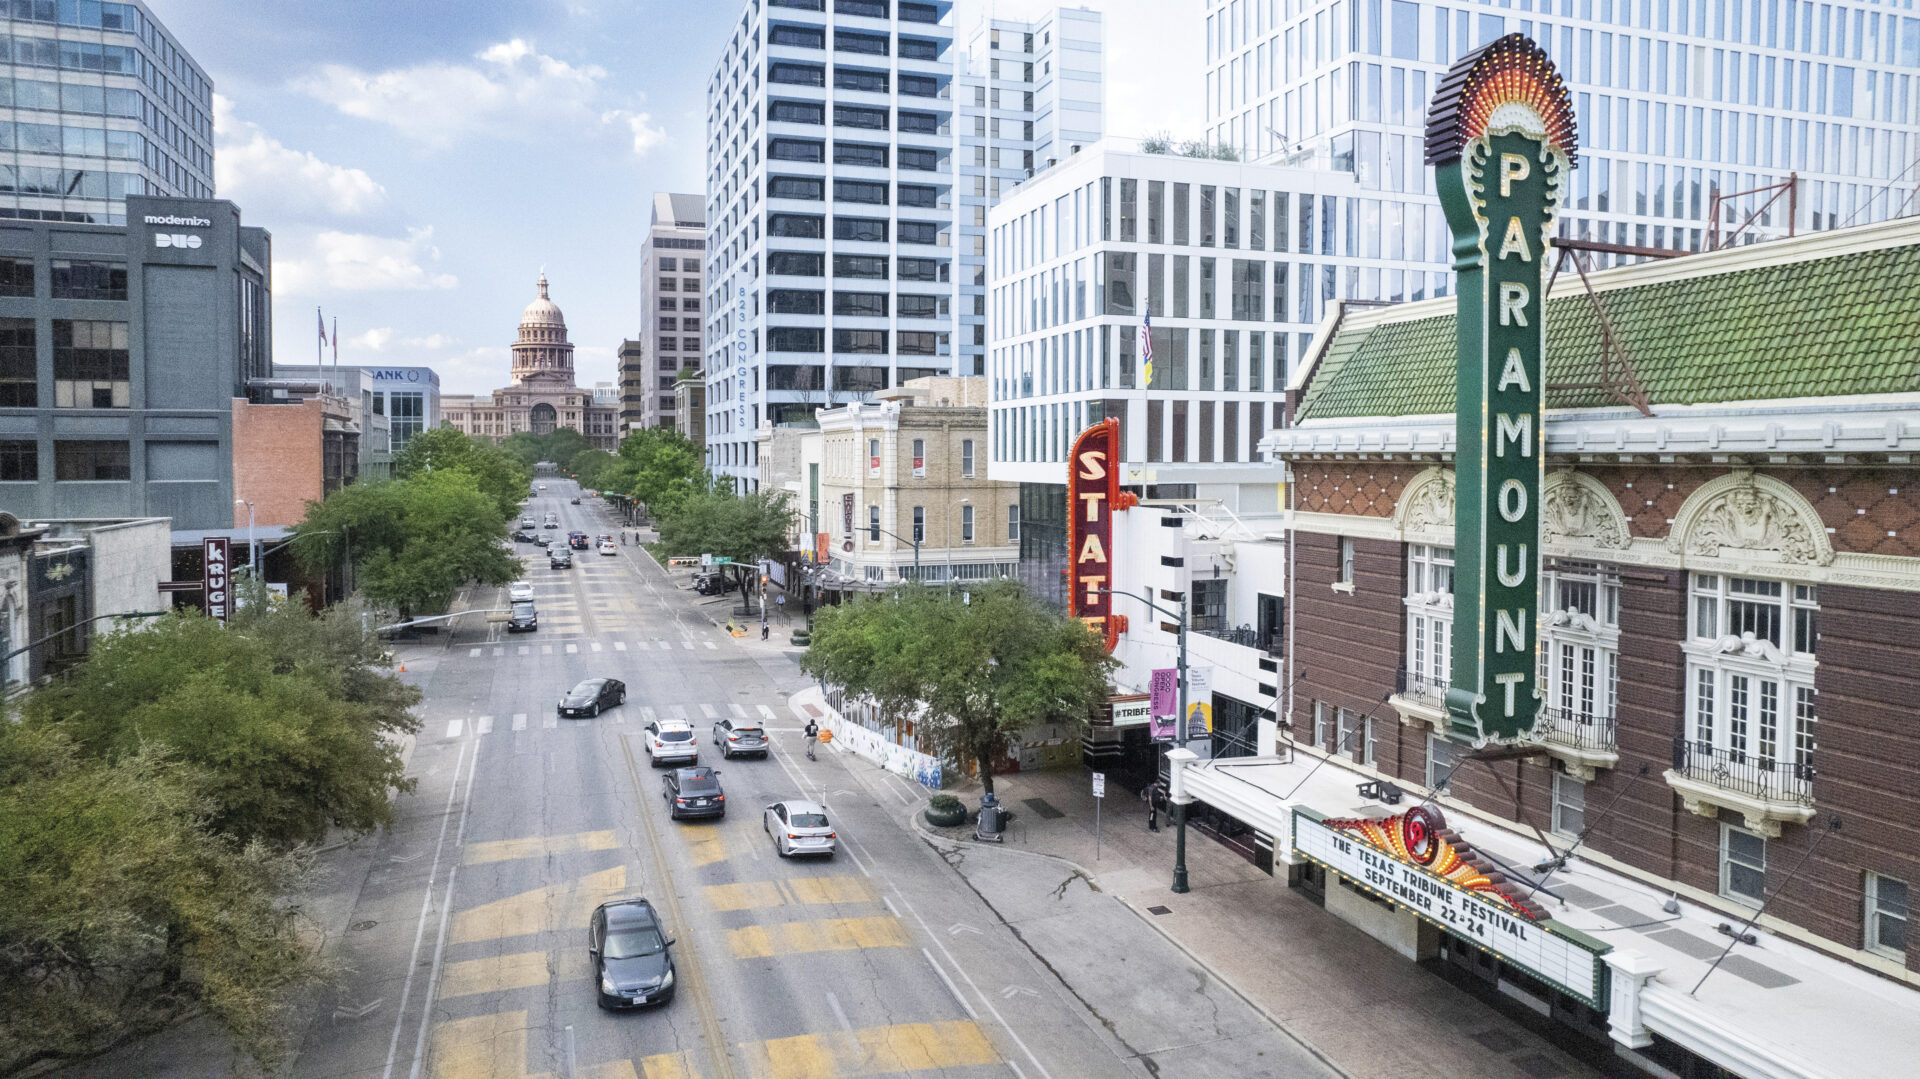 View of South Congress Avenue in Austin Texas with Paramount Theater sign and state capitol building in view